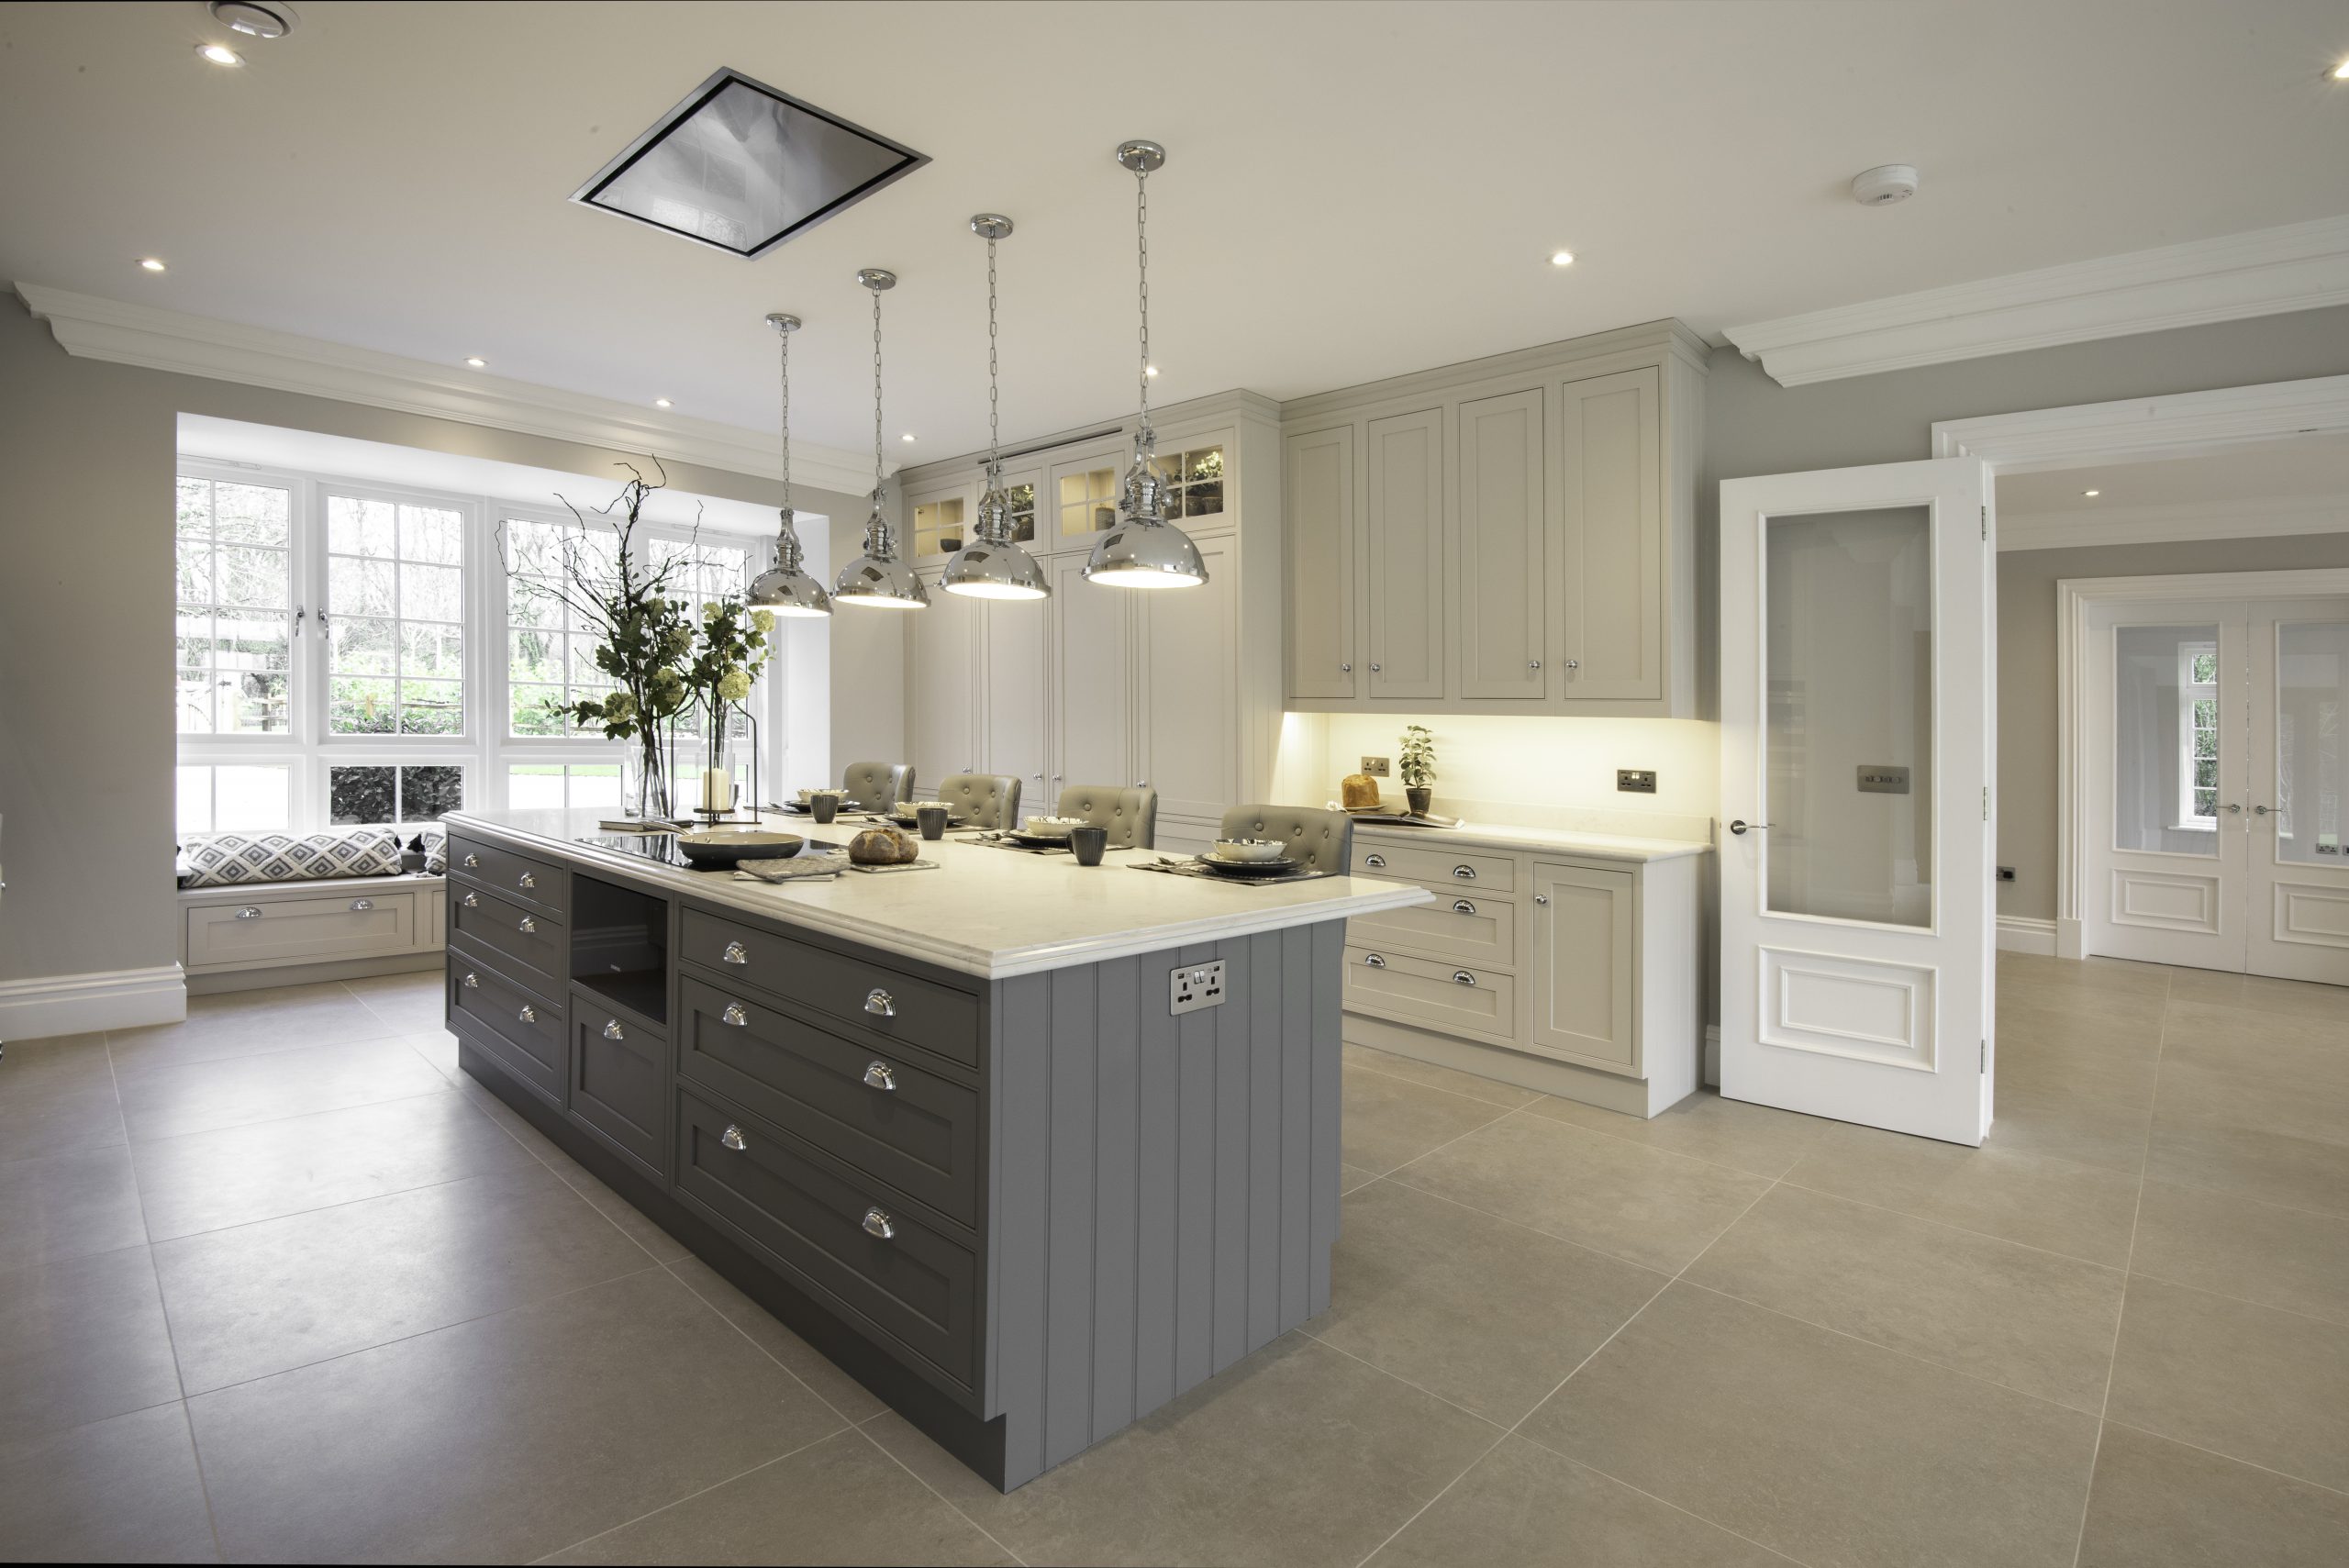 Soft grey kitchen with large island for seating, storage and housing appliances. 